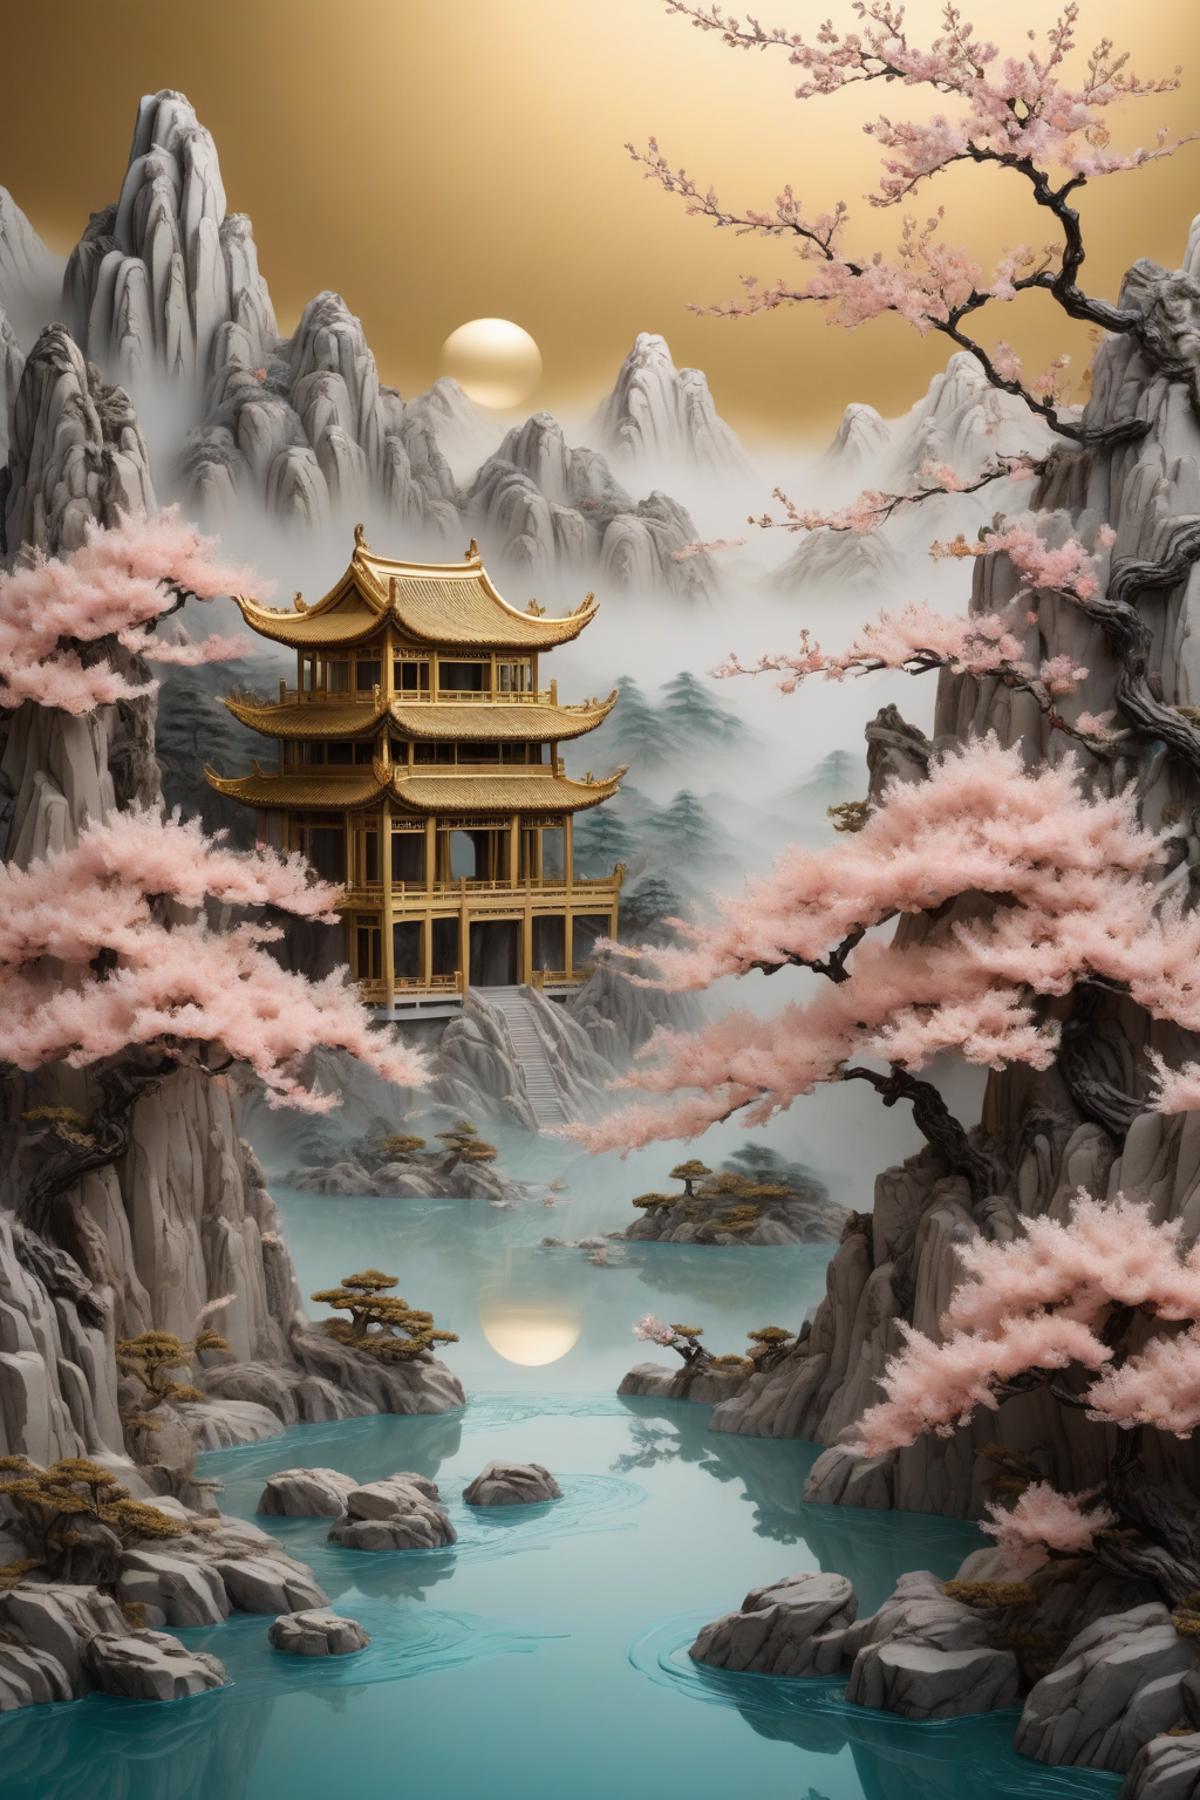 A serene scene with a palace, water, and cherry blossoms.